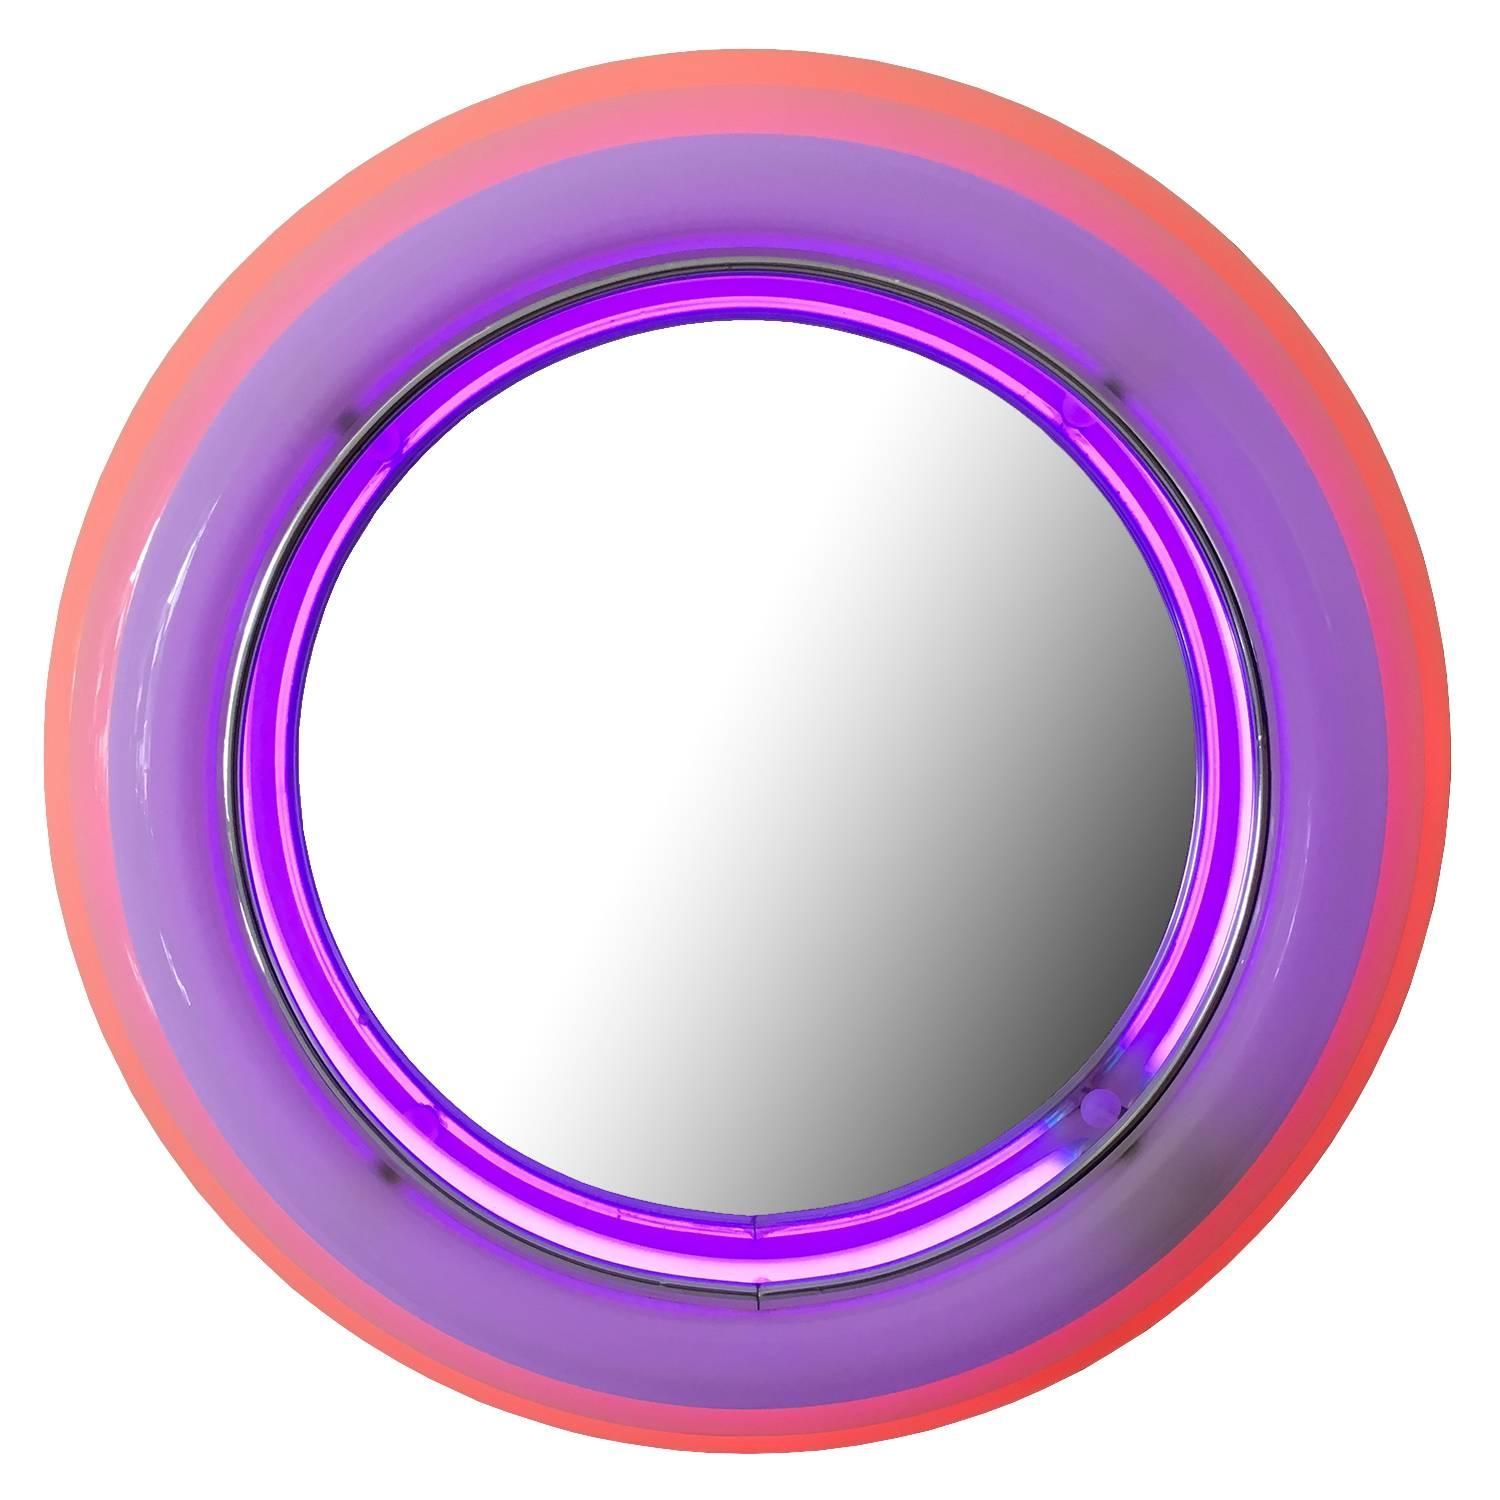 Sottsass style round sculptural acrylic wall mirror with neon lights. off-white molded stepped acrylic form with two internal rings of neon in purple and pink. Recessed round mirror. Clear acrylic face framed in chrome banding. Similar in style to